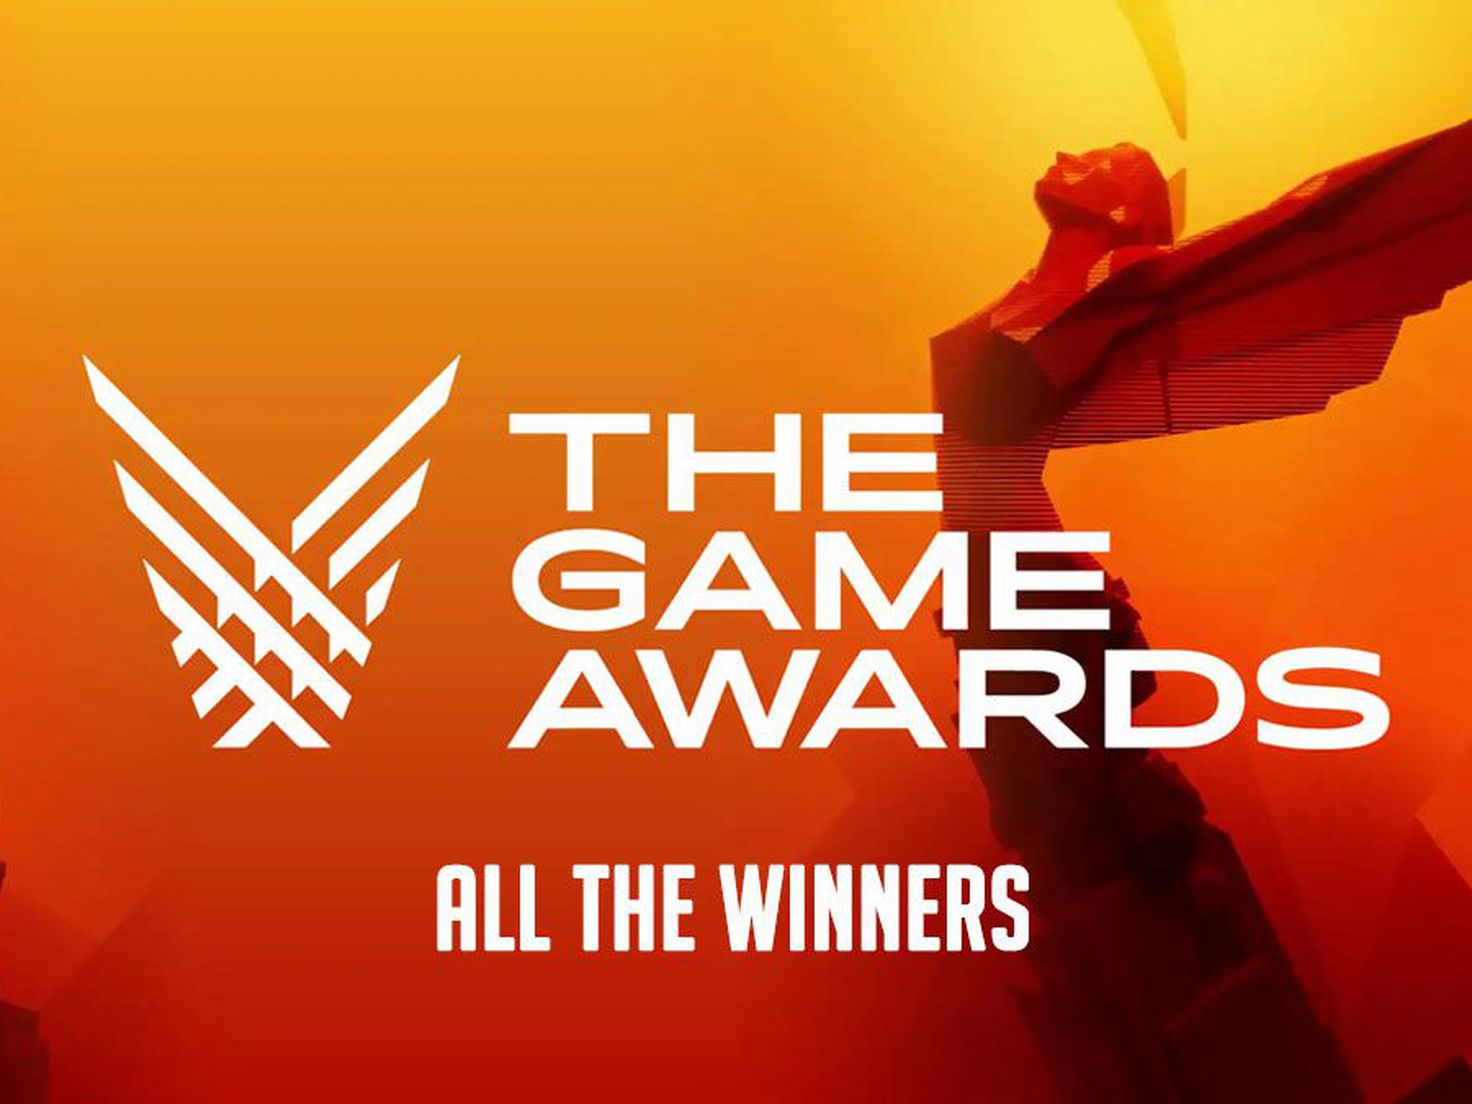 Tag: The game awards 2022 - Neowin